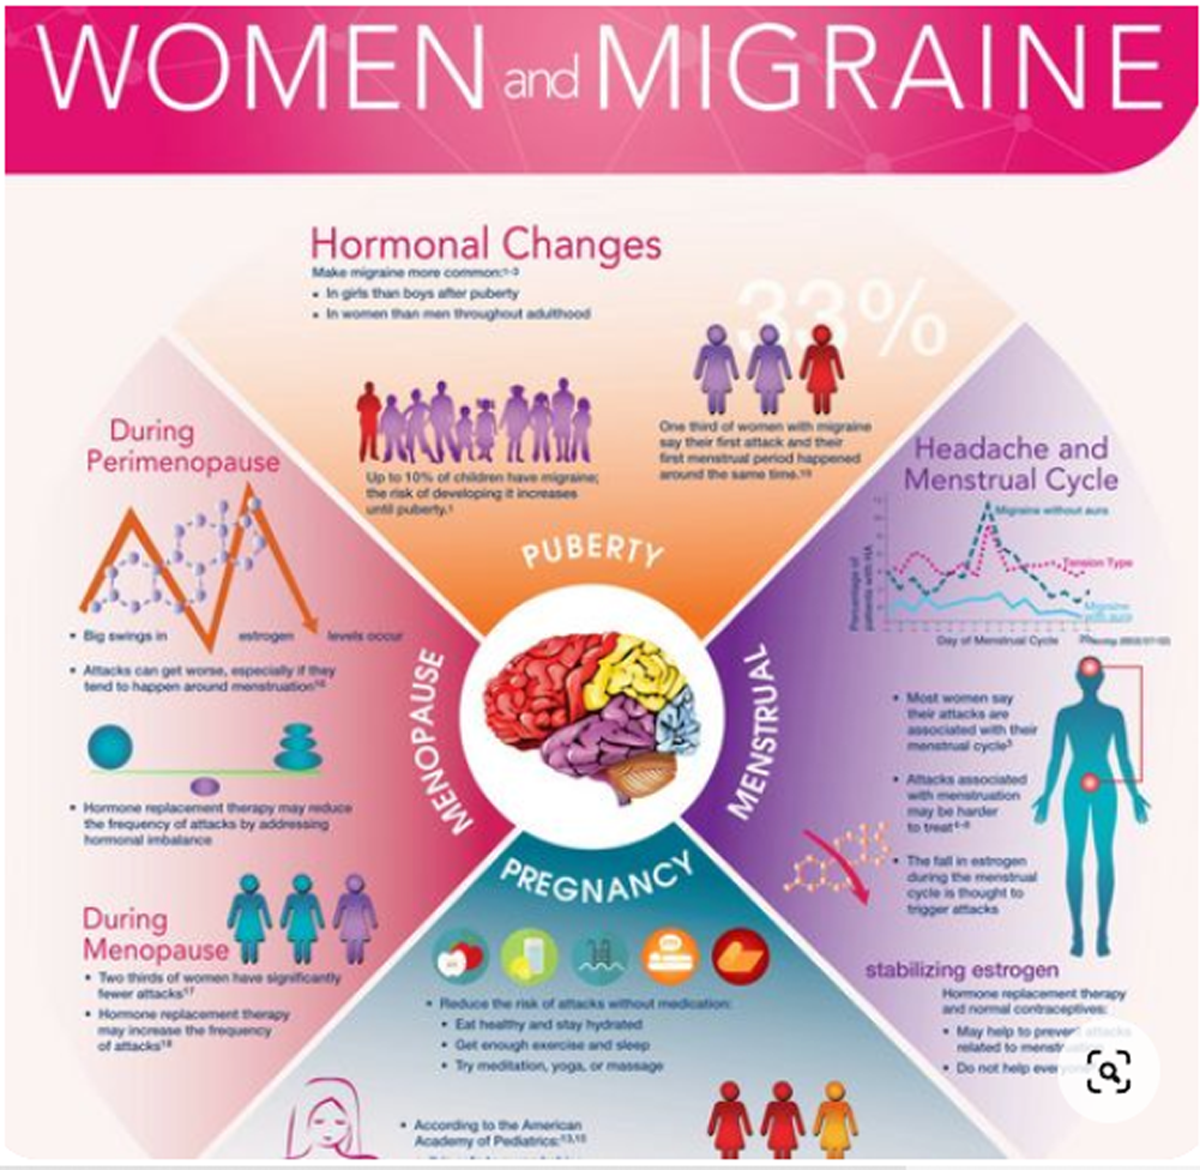 The Physical Impact of Migraines on Female Chiropractic Patients: A Qualitative Study